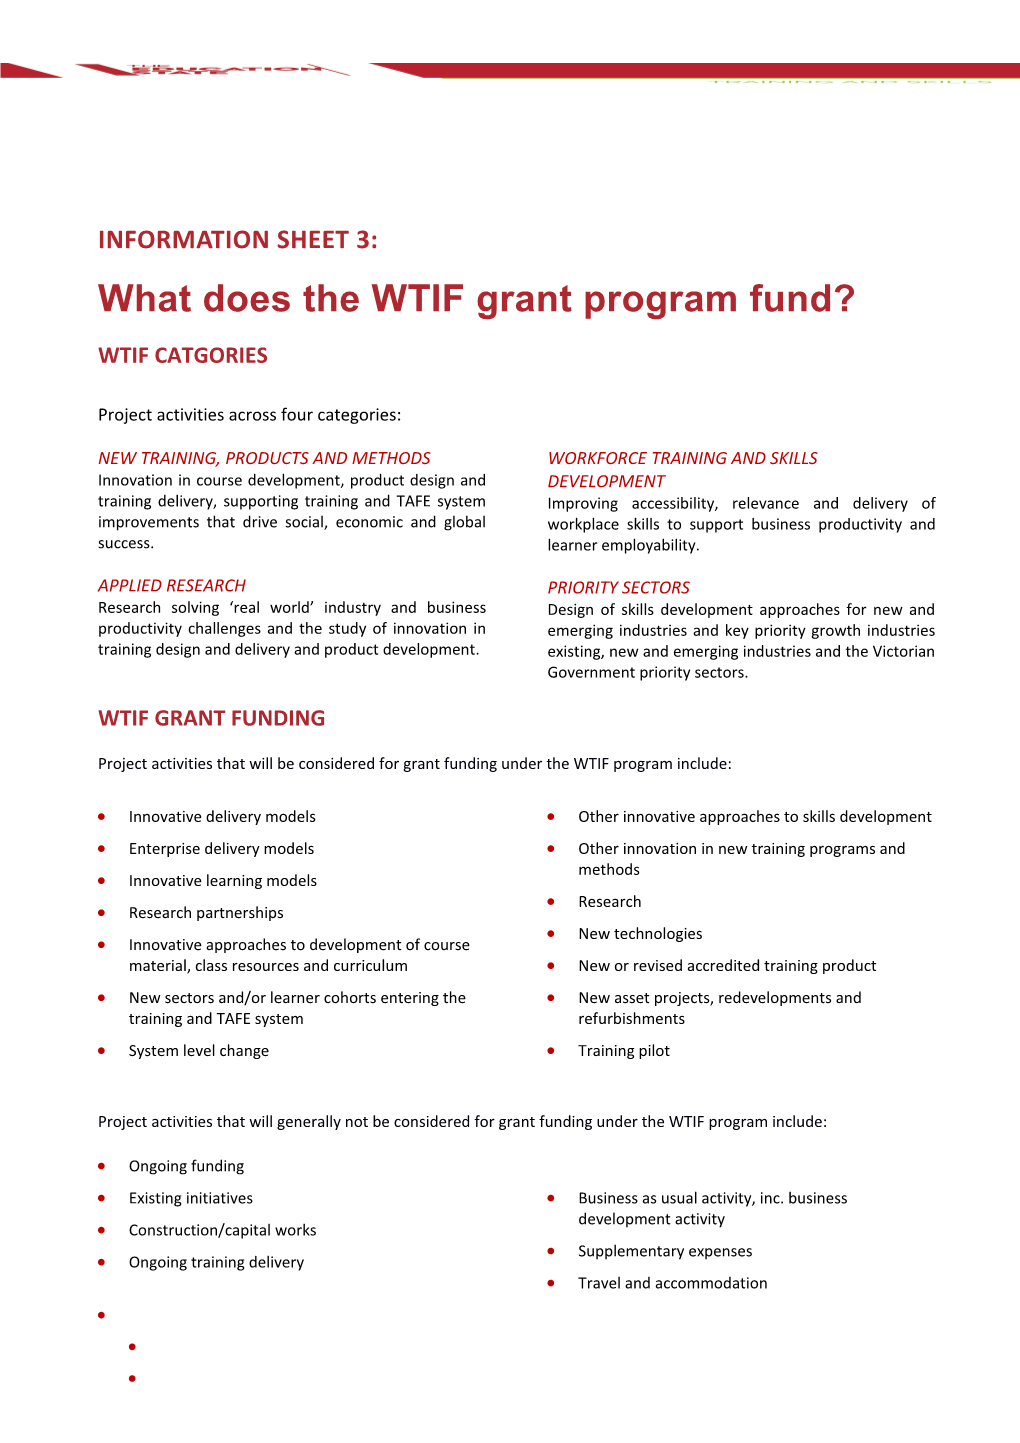 What Does the WTIF Grant Program Fund?